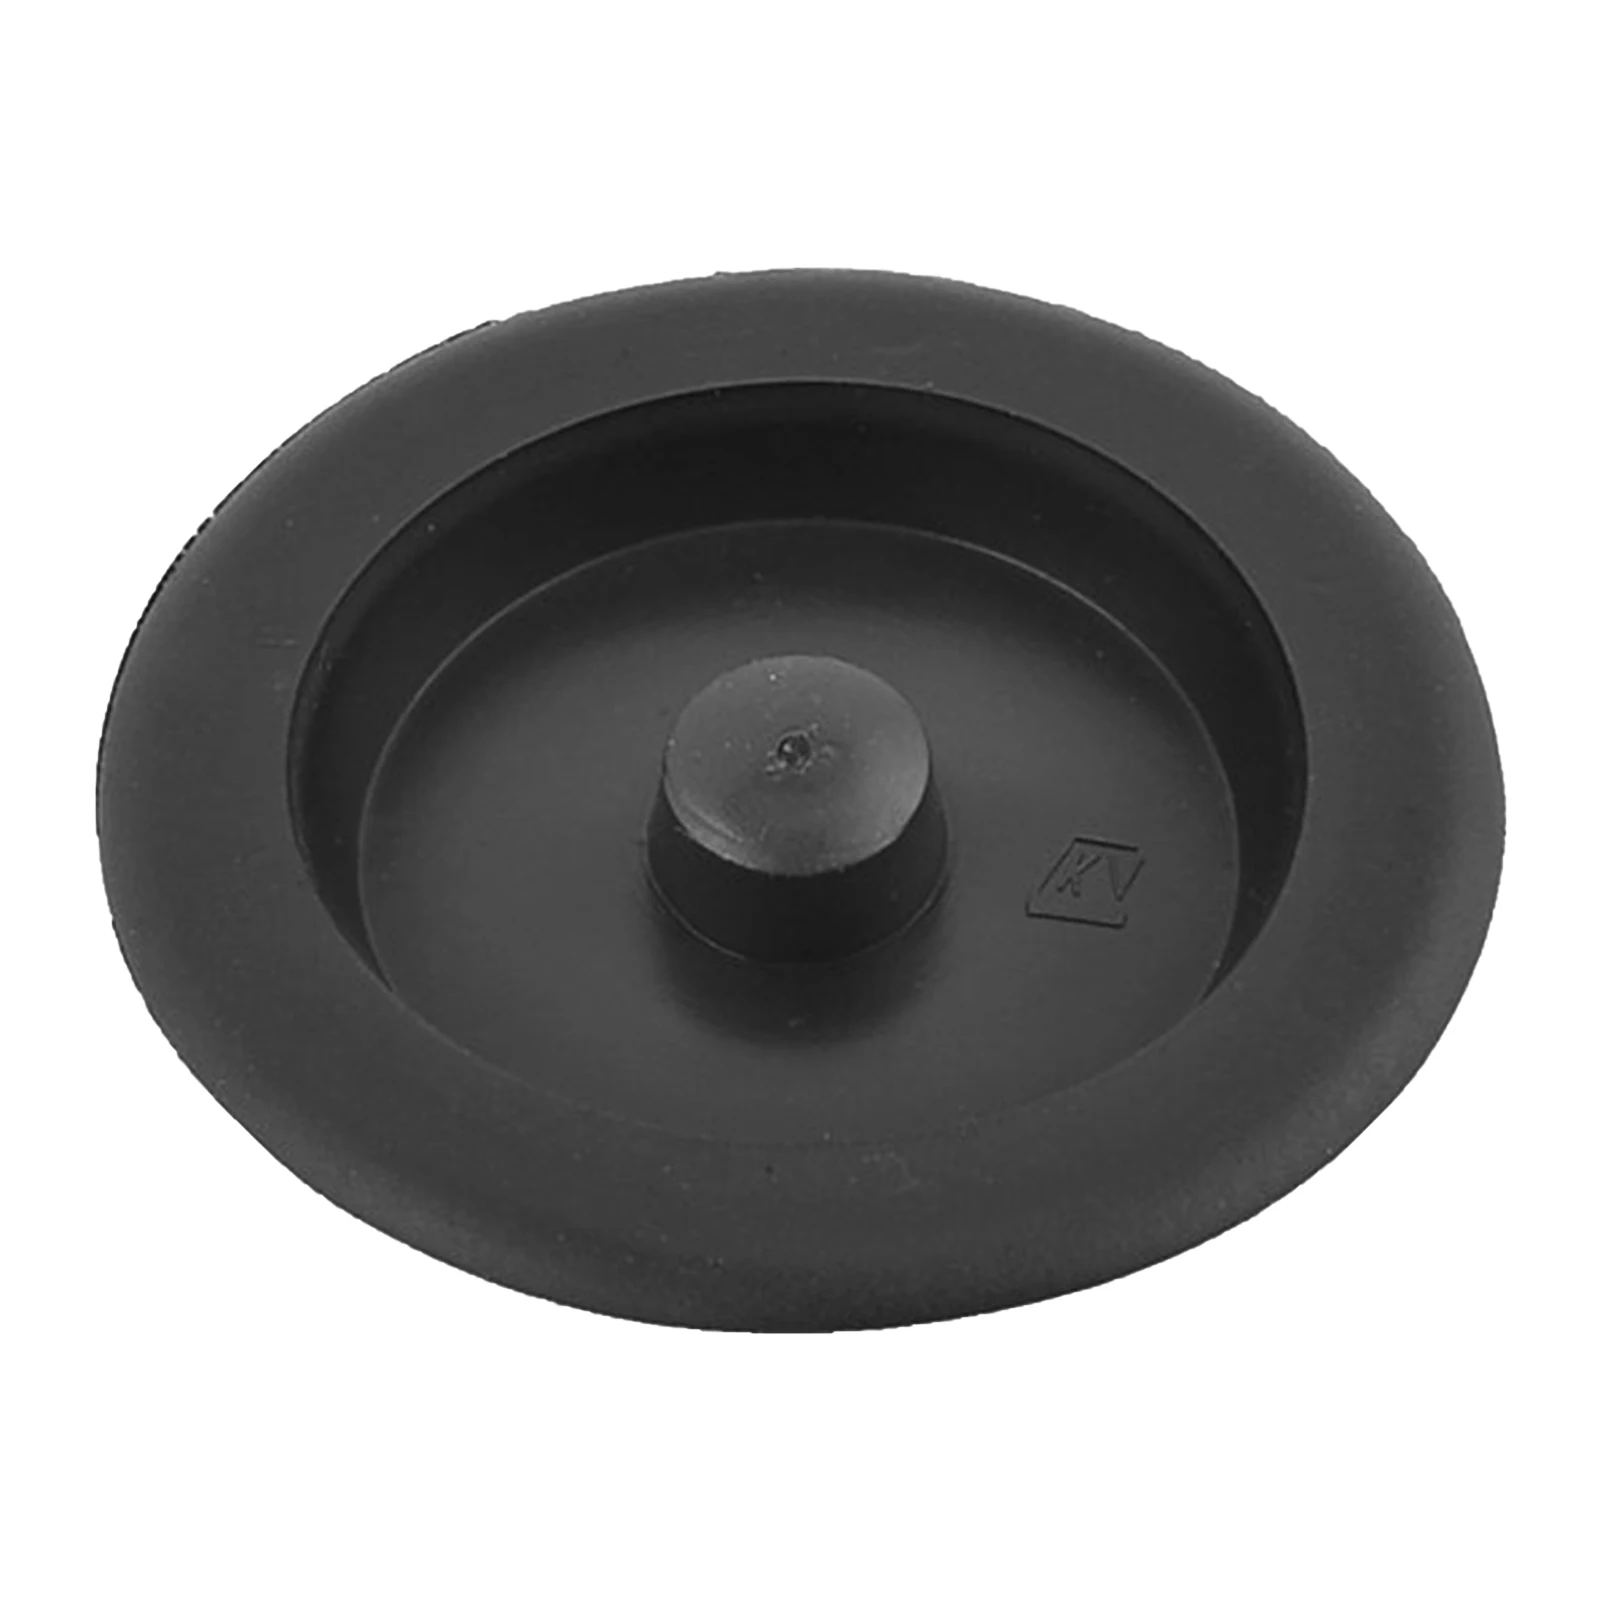 

Home Office Black Laundry Room Replacement Plug Garbage Disposal Kitchen Drain Round Accessories Sink Stopper Universal Bathtub